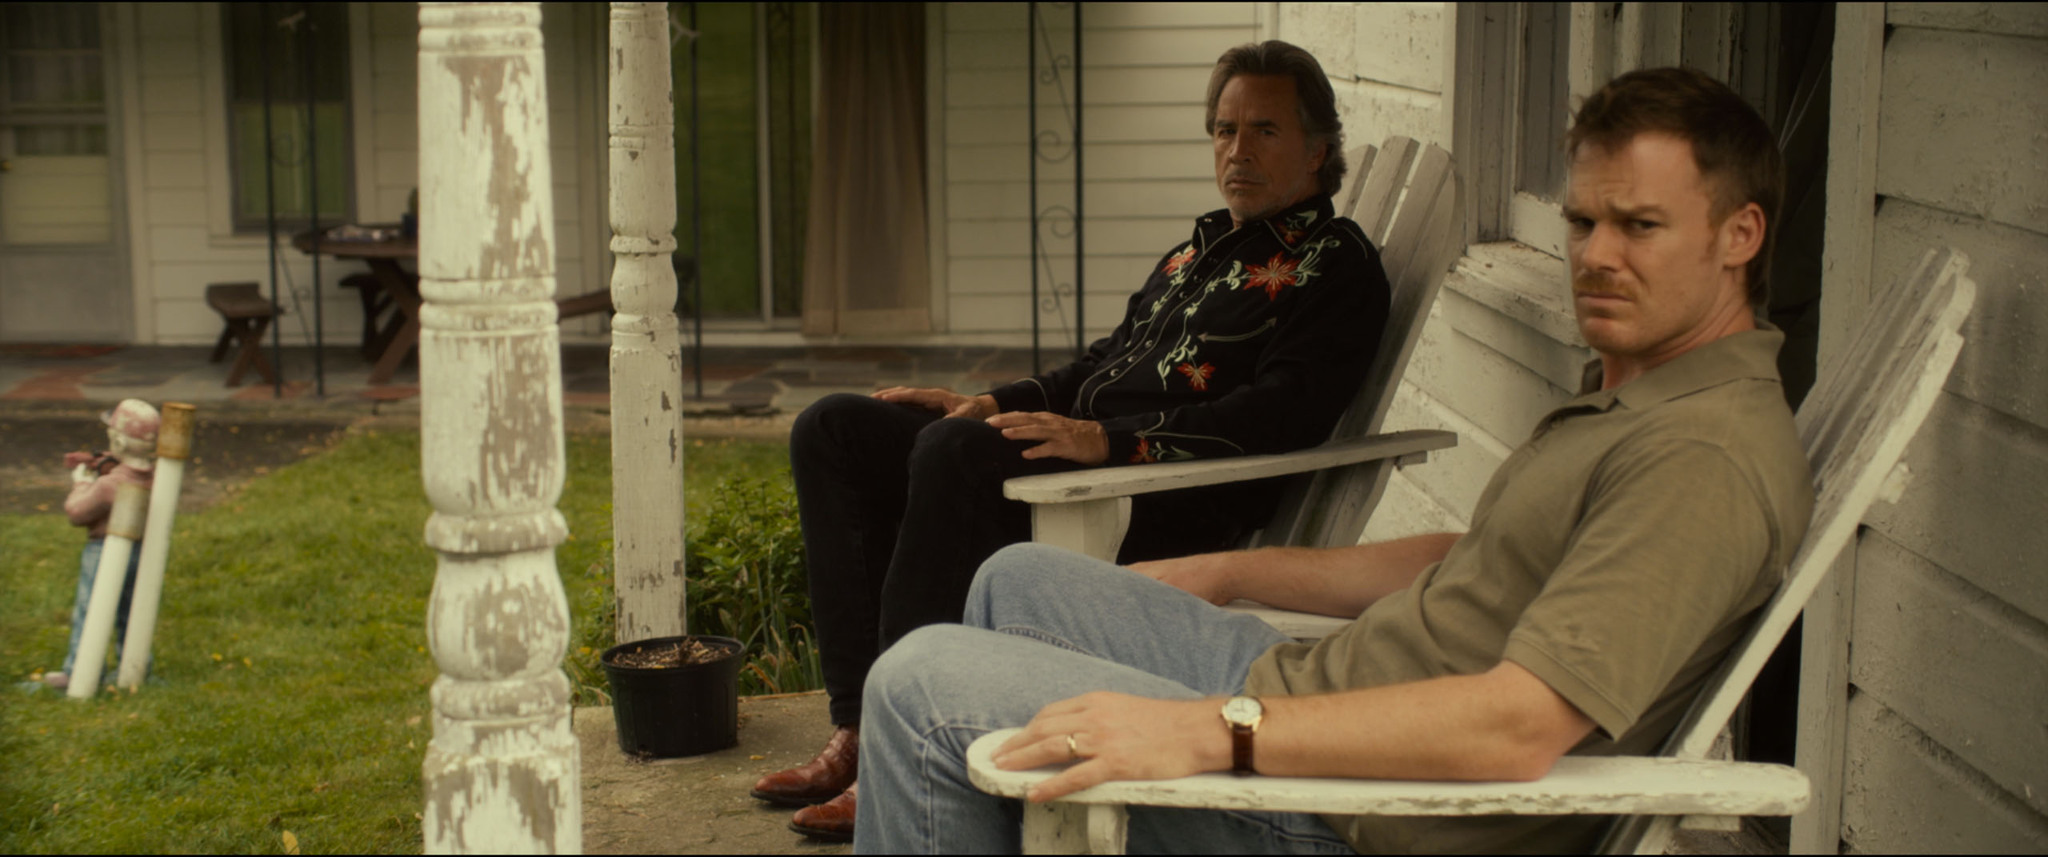 Still of Don Johnson and Michael C. Hall in Cold in July (2014)